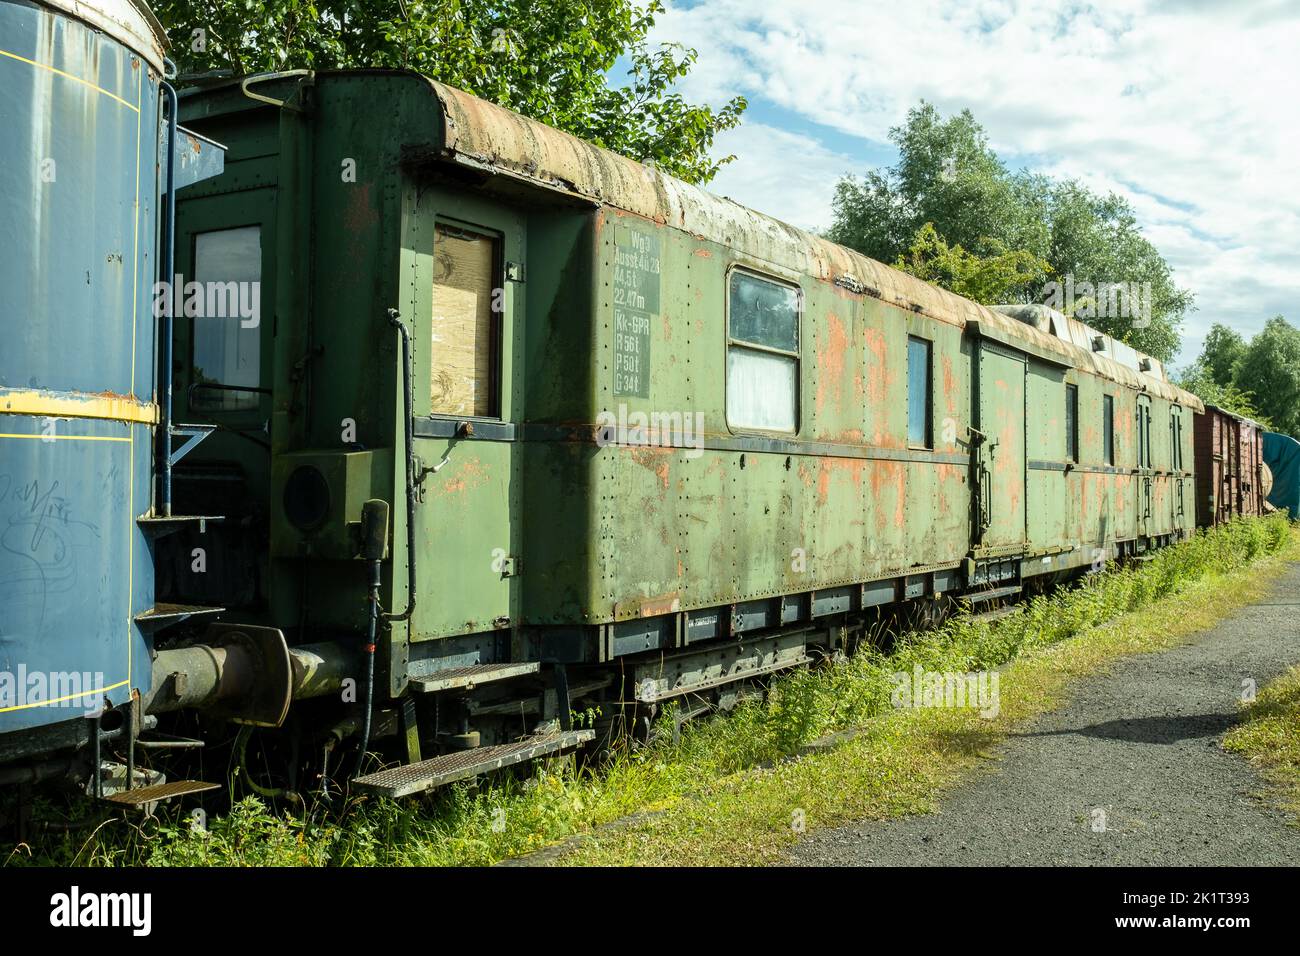 An old train wagon in a train museum Stock Photo